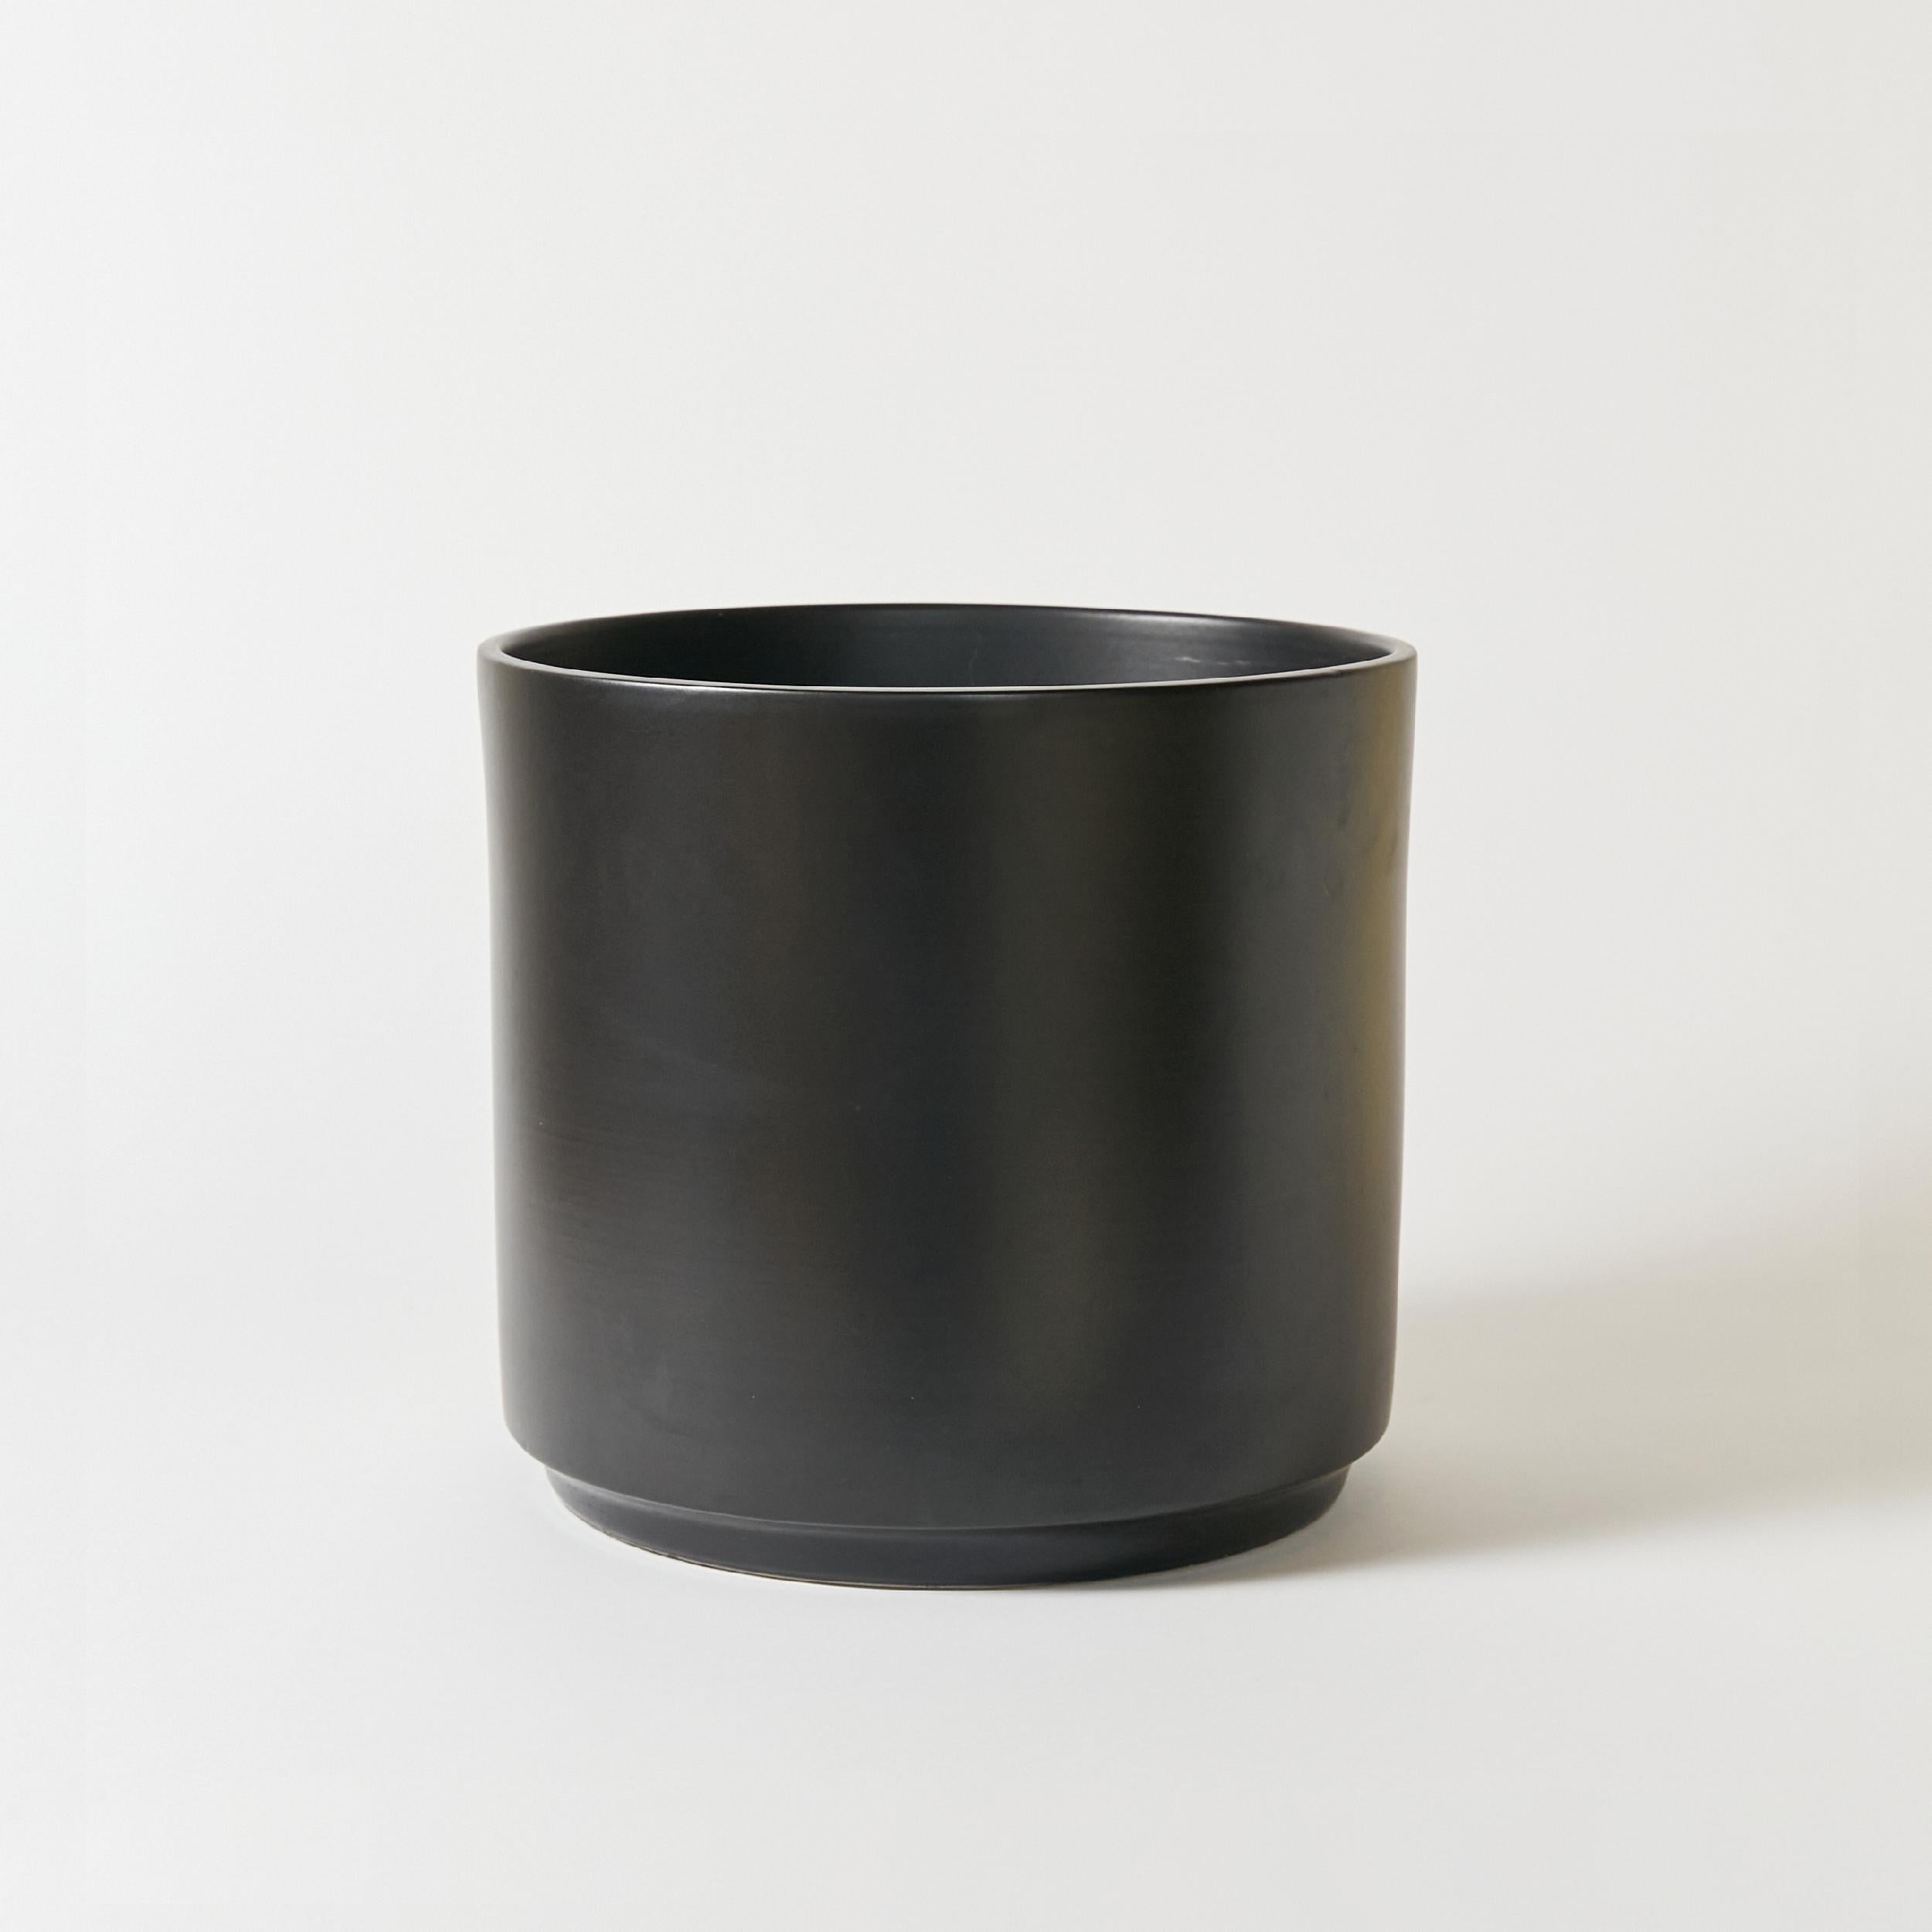 One architectural pottery planter finished in satin black glaze. Signed Gainey on the bottom. Made in California in 1960s.
This item pairs perfectly with our pair of Gainey smaller black planters. Our reference 23.0084.